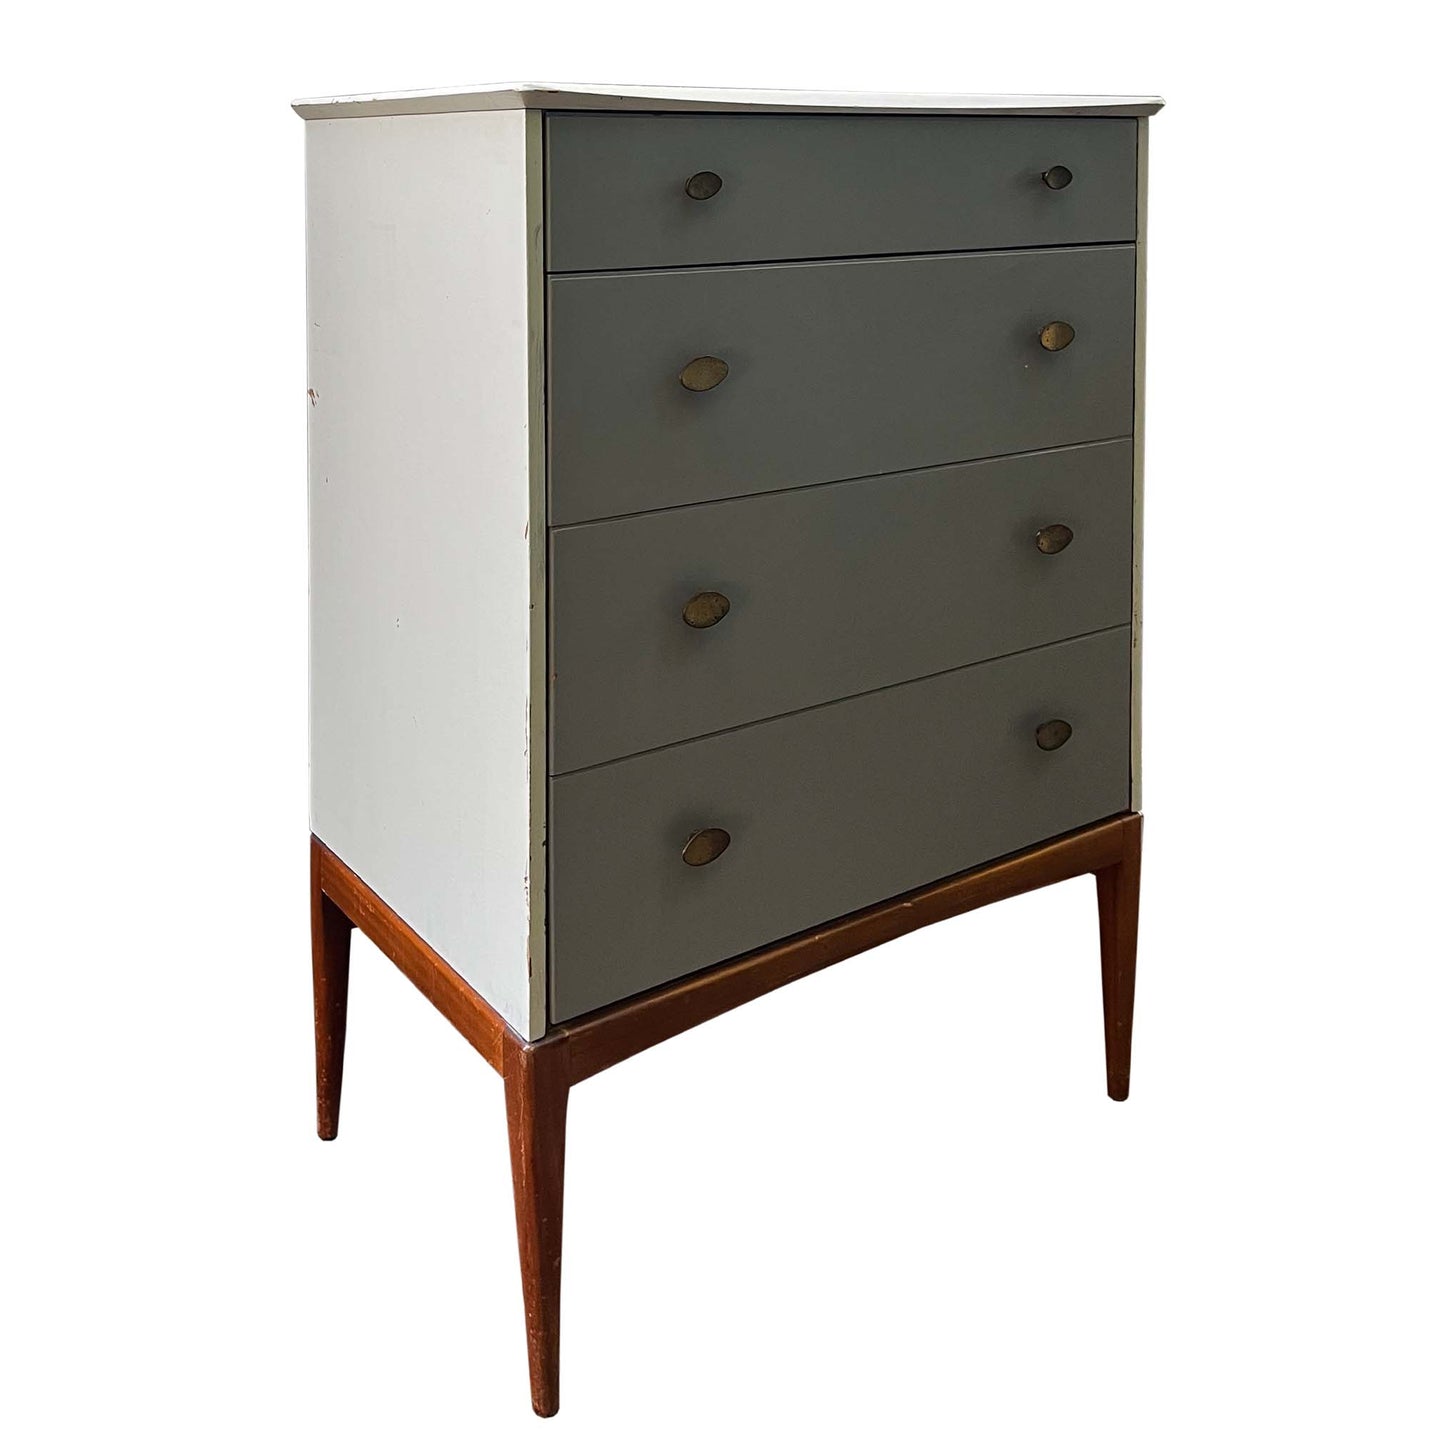 Vintage Mid-century modern chest of drawers ready for customisation